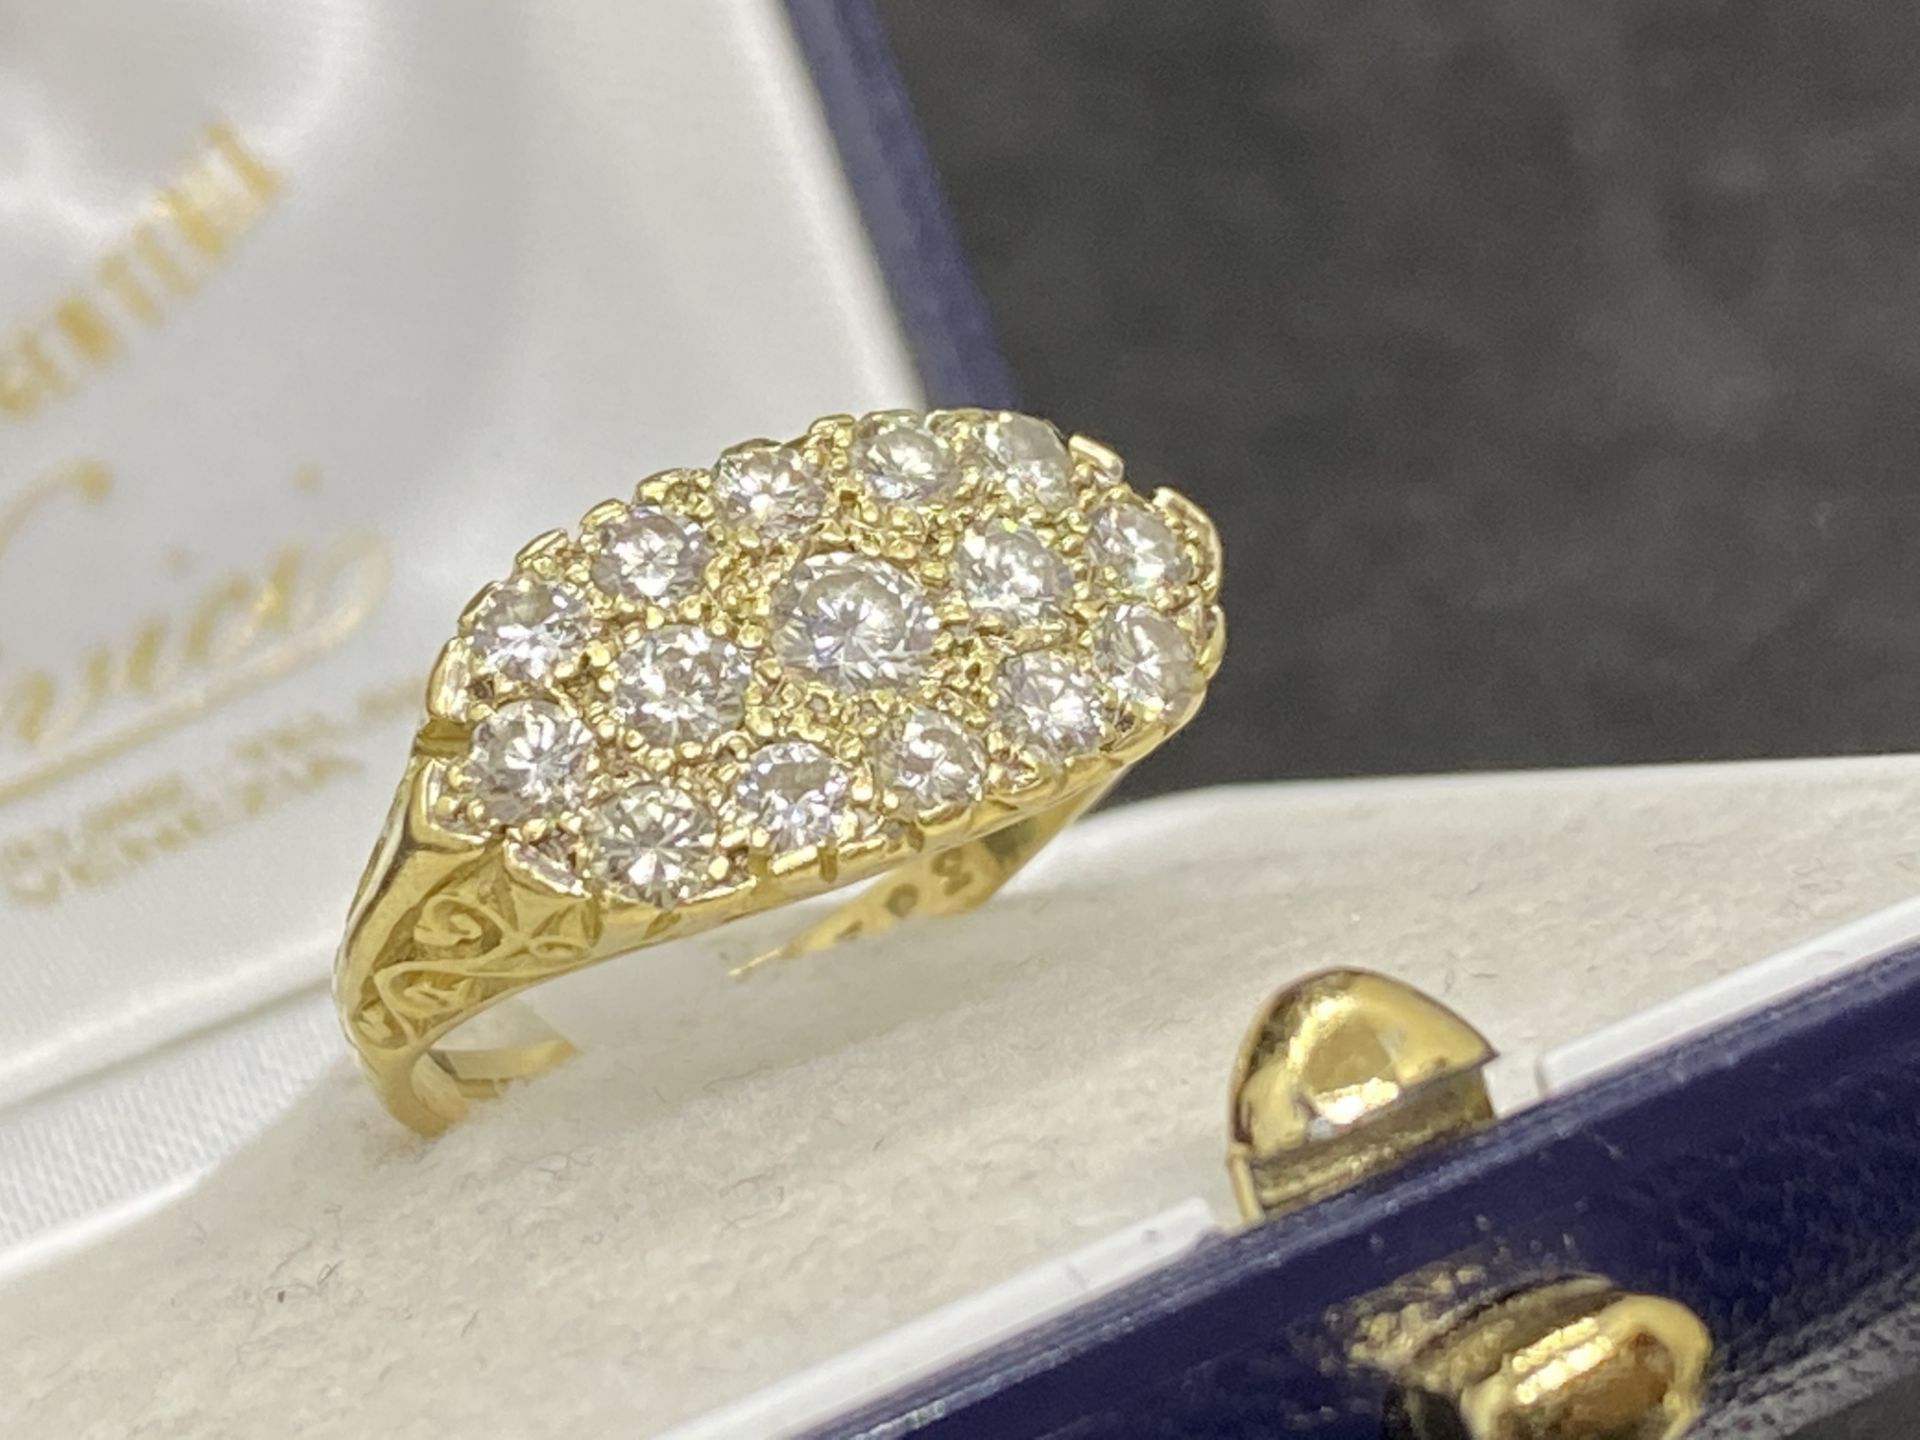 18ct YELLOW GOLD 3.27ct DIAMOND RING WITH 11K INSURANCE VALUATION